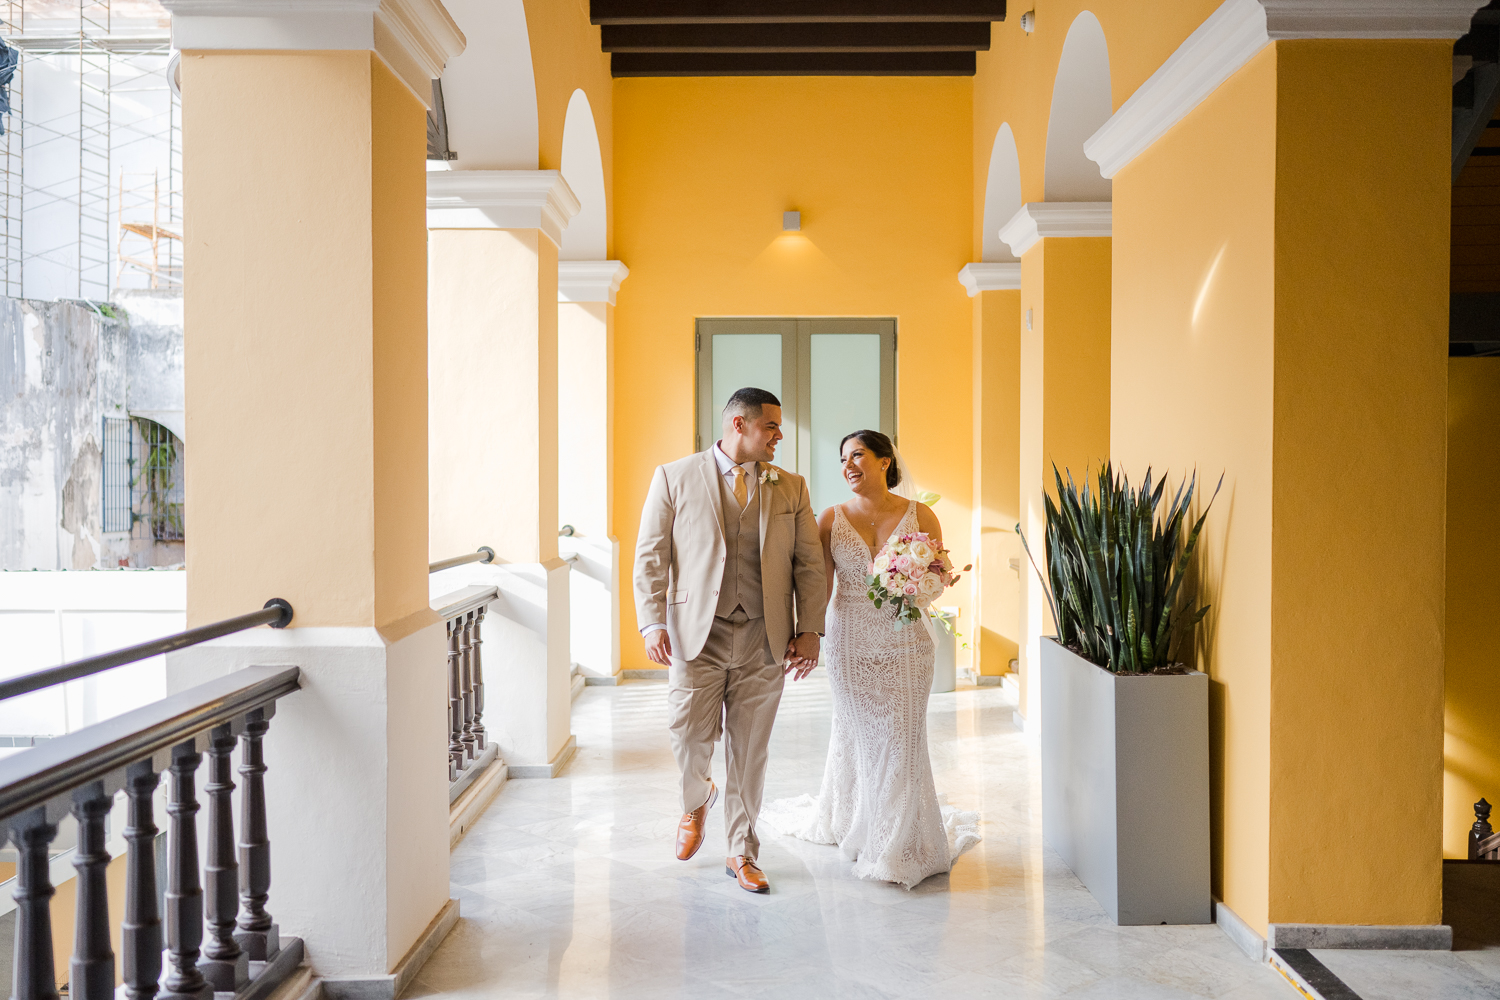 hotel palacio provincial and el morro fortress puerto rico elopement photography by camille fontz